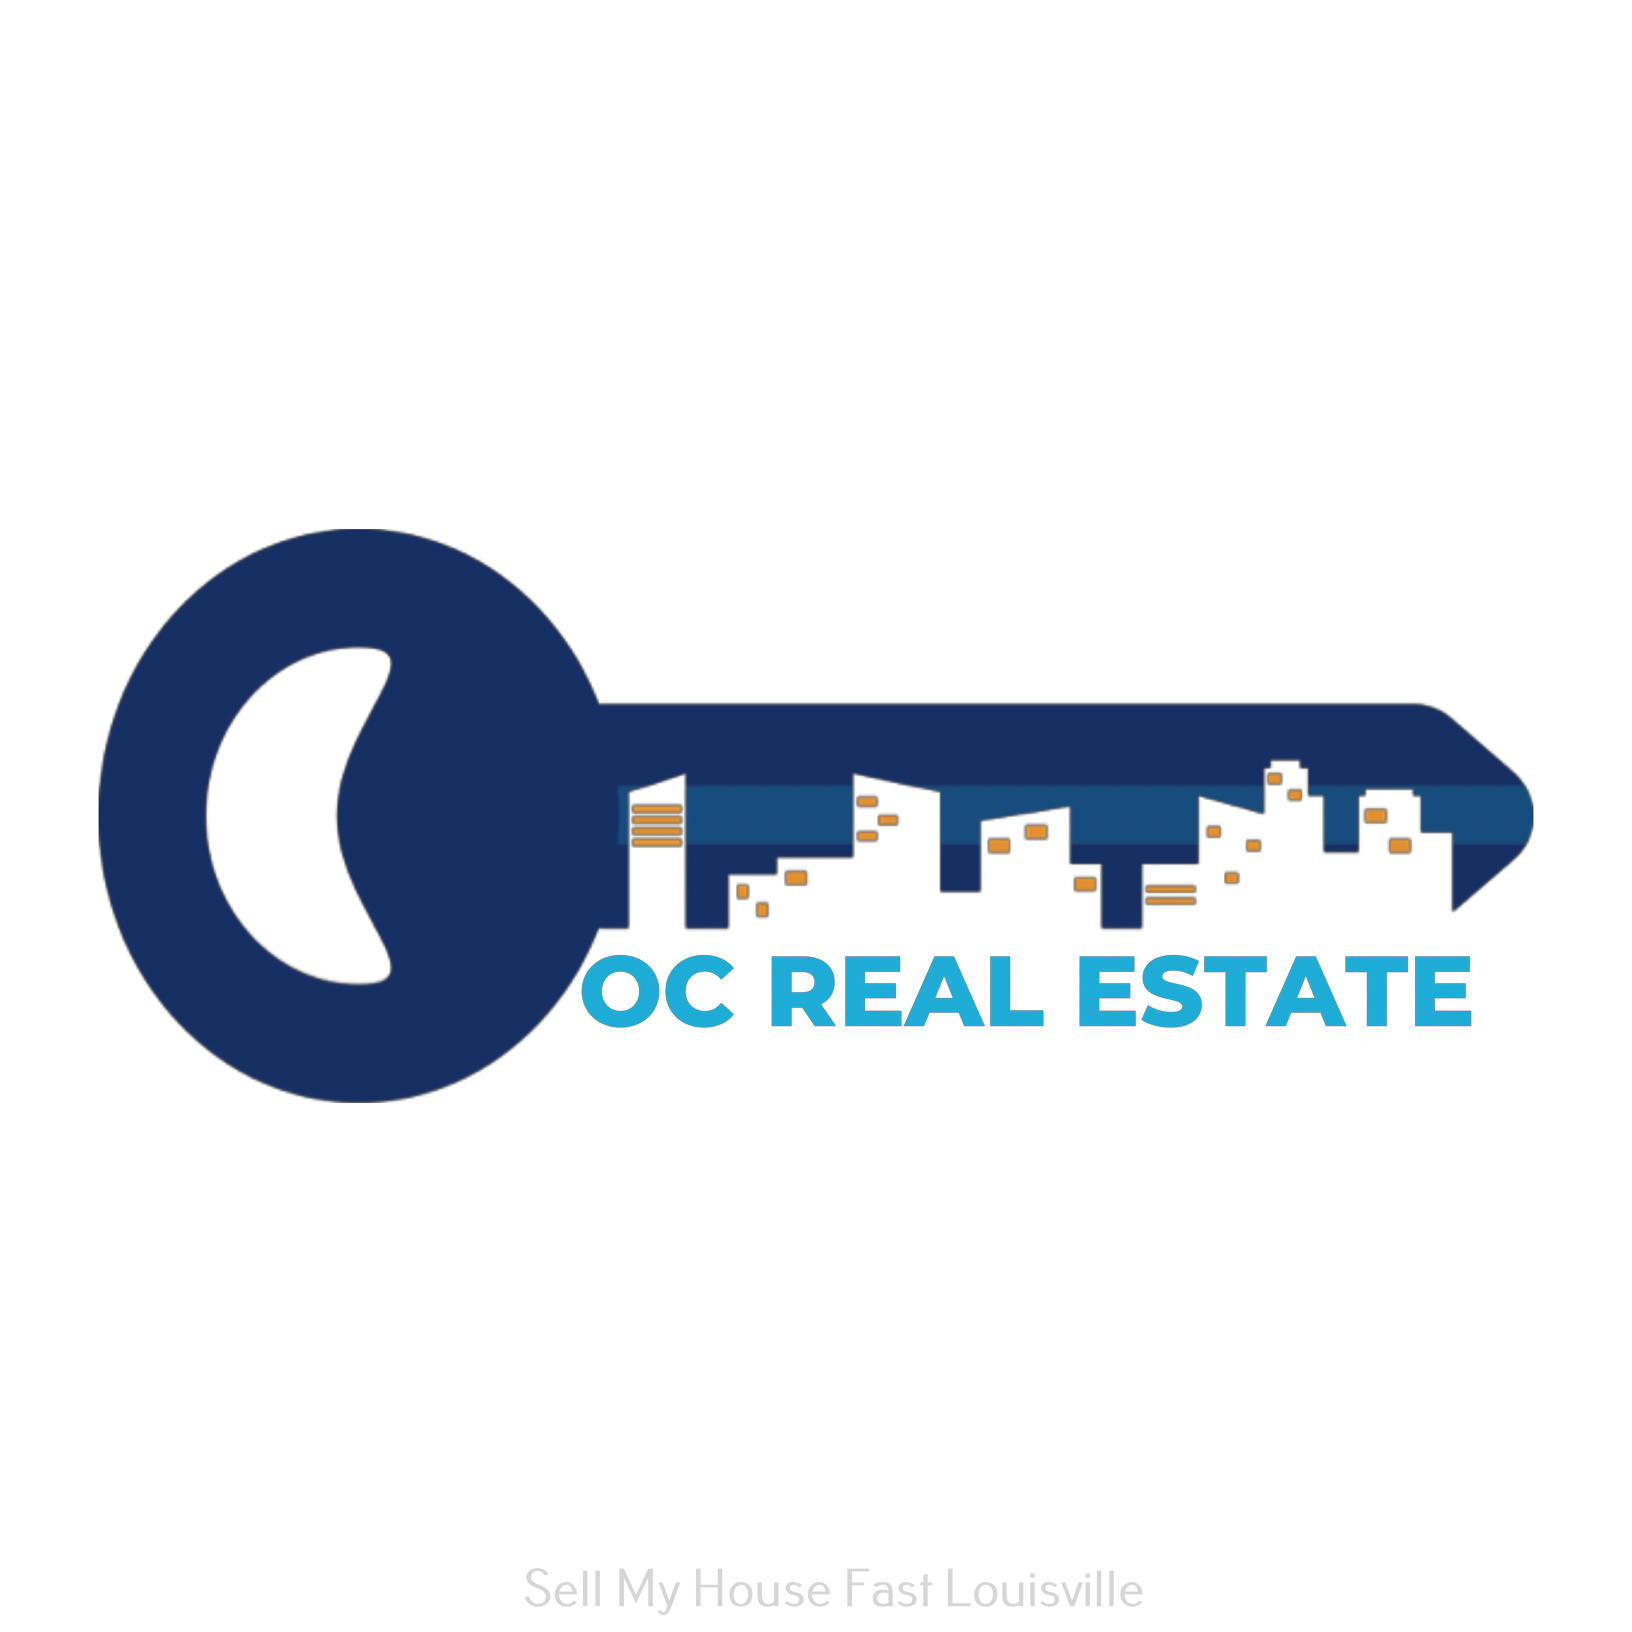 OC Real Estate LLC Explains the Integrity Behind Cash Purchases in the Real Estate Market